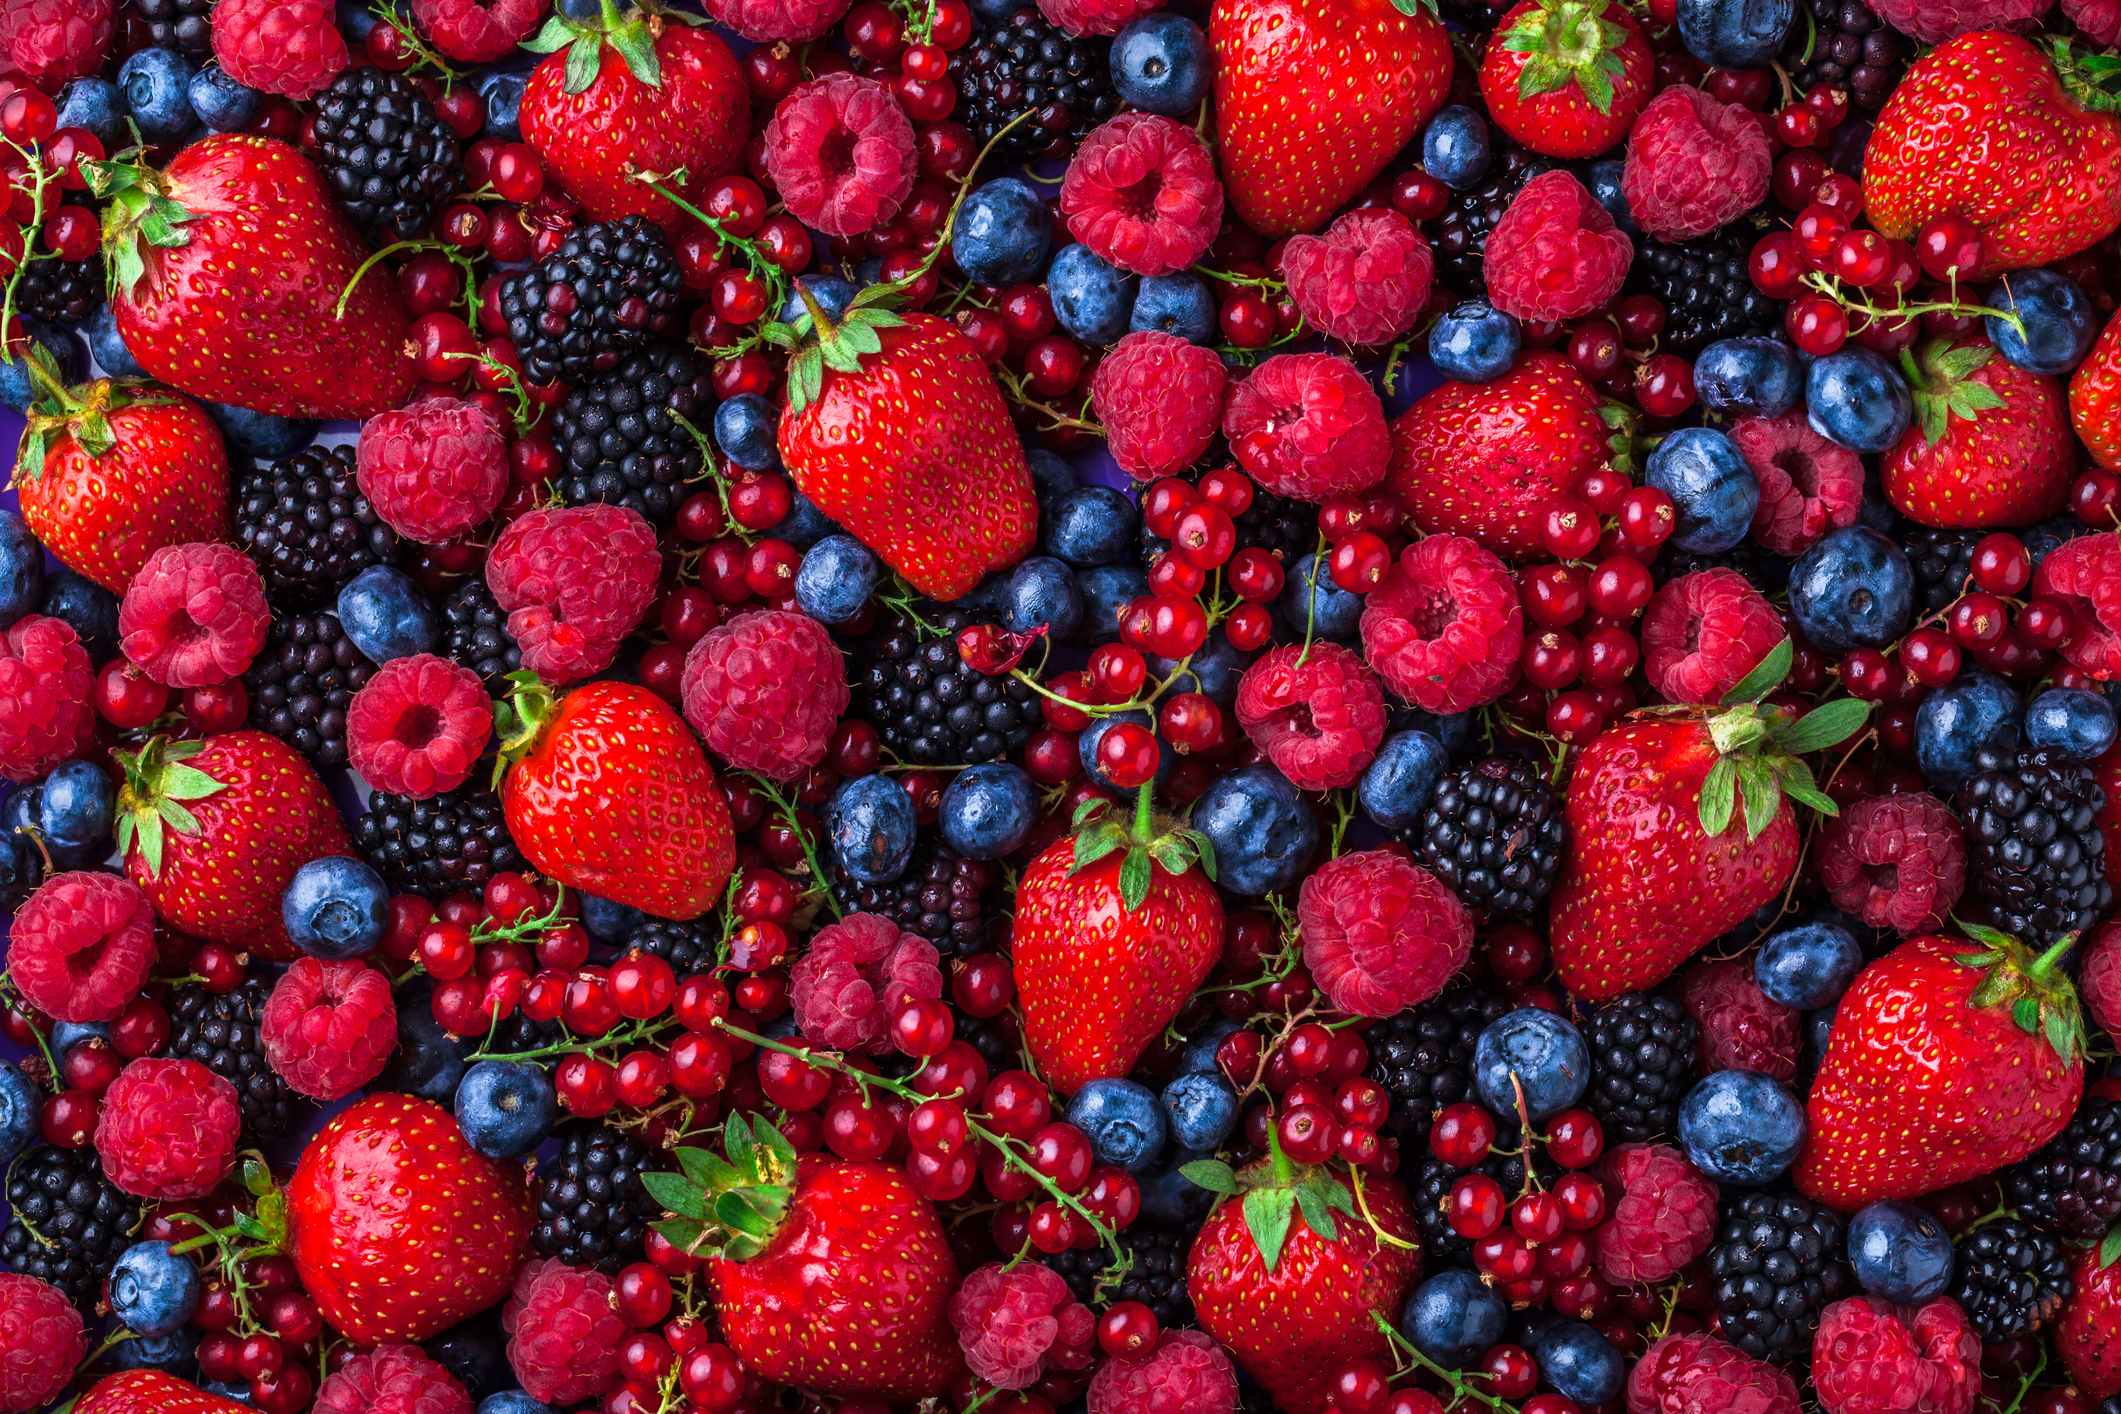 5 super nutritious fruits to enjoy before summer ends